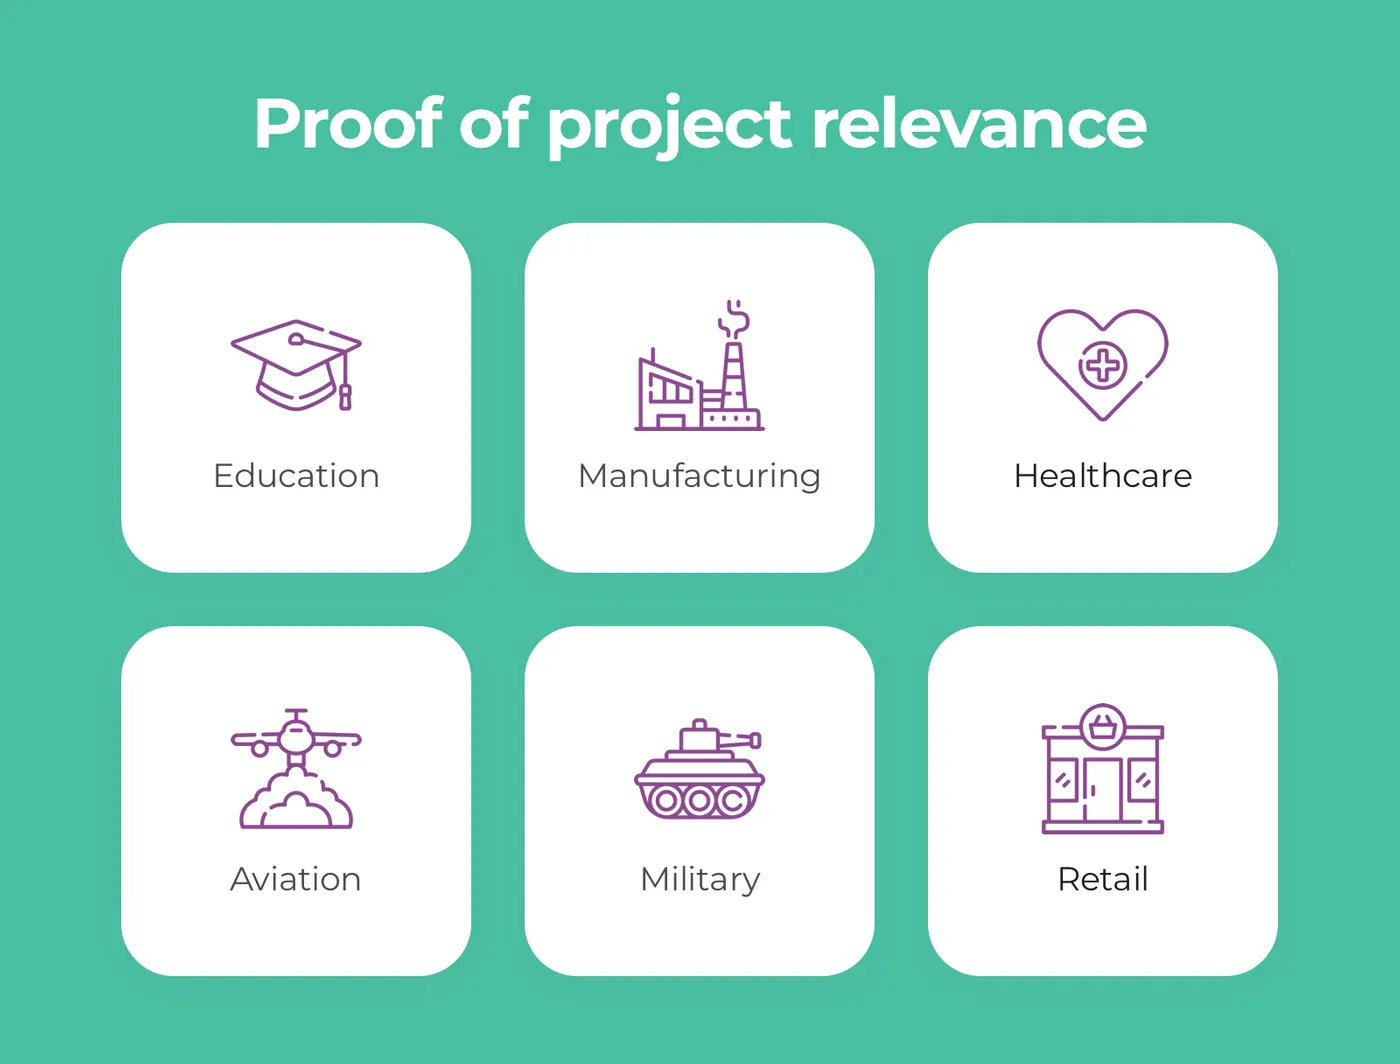 Proof of project relevance